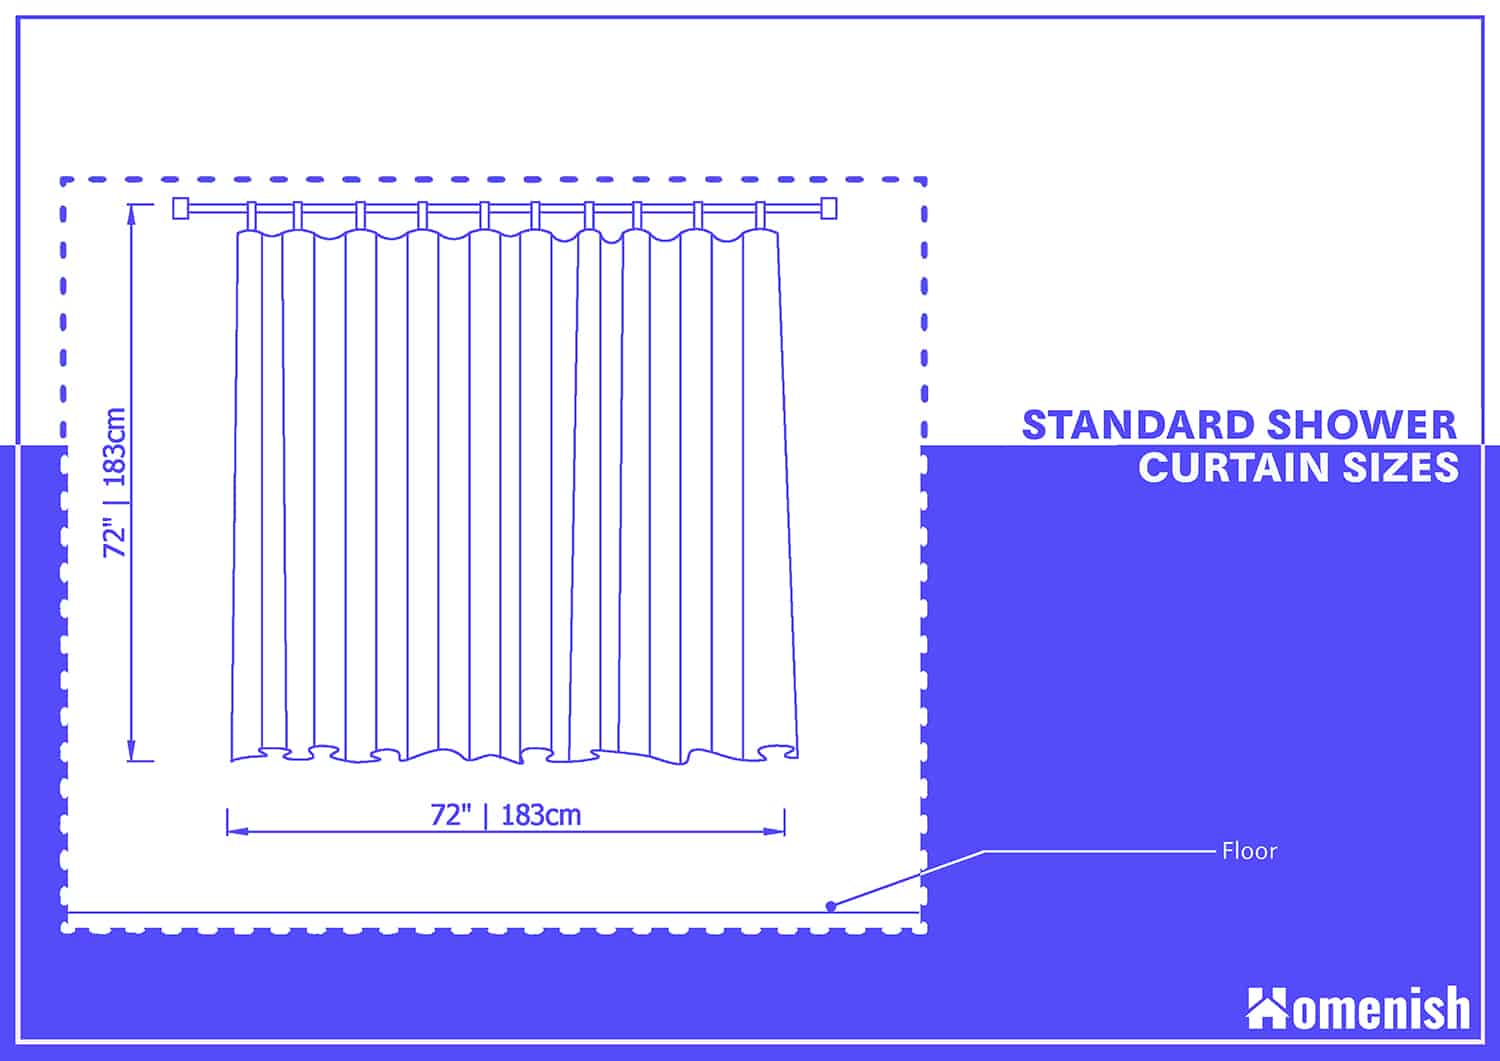 Standard Shower Curtain Size, What Is The Typical Length Of A Shower Curtain